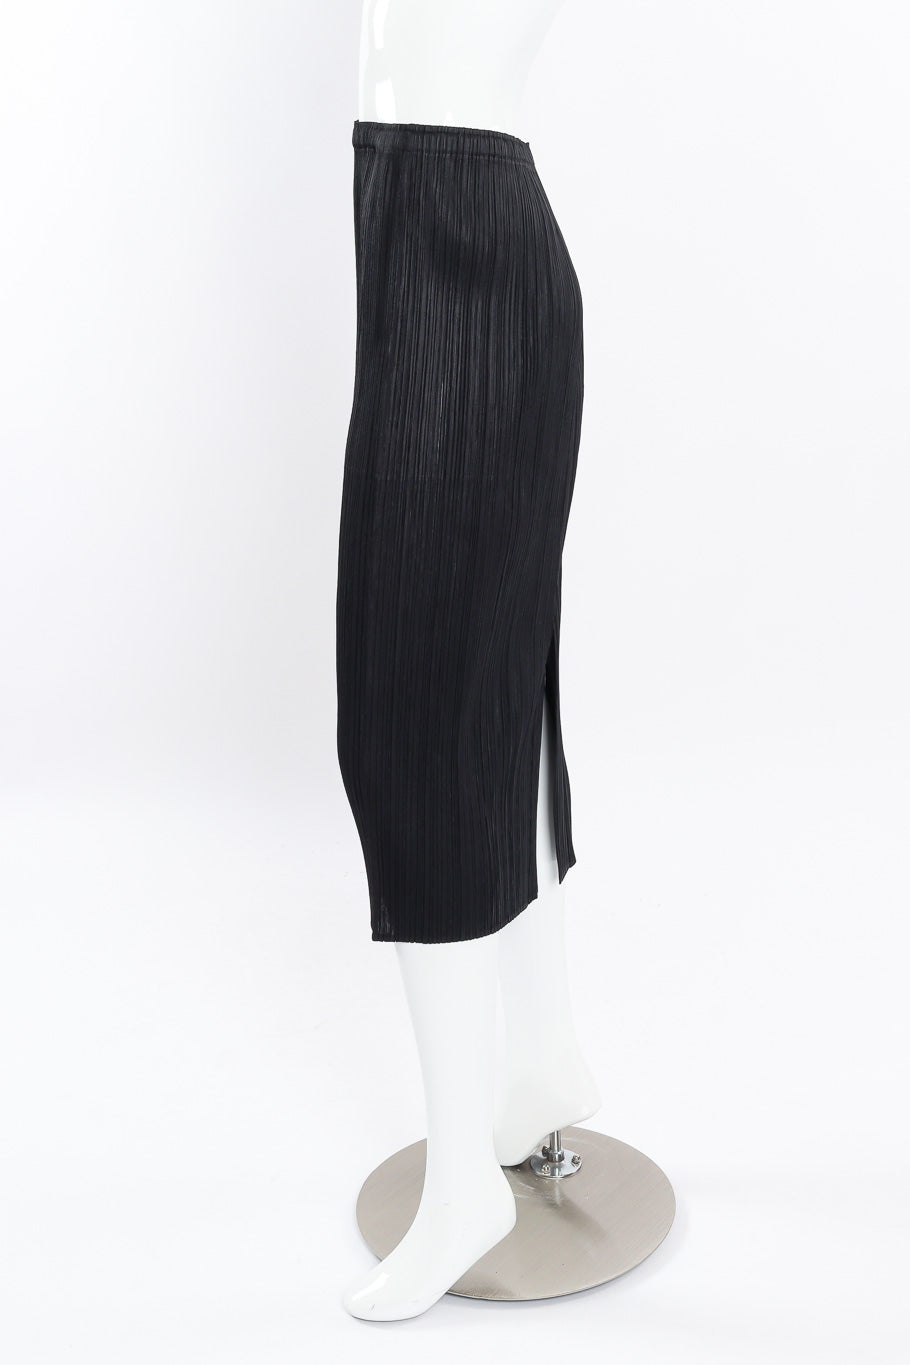 Pleated skirt, top, and jacket set by Issey Miyake on mannequin side skirt only @recessla